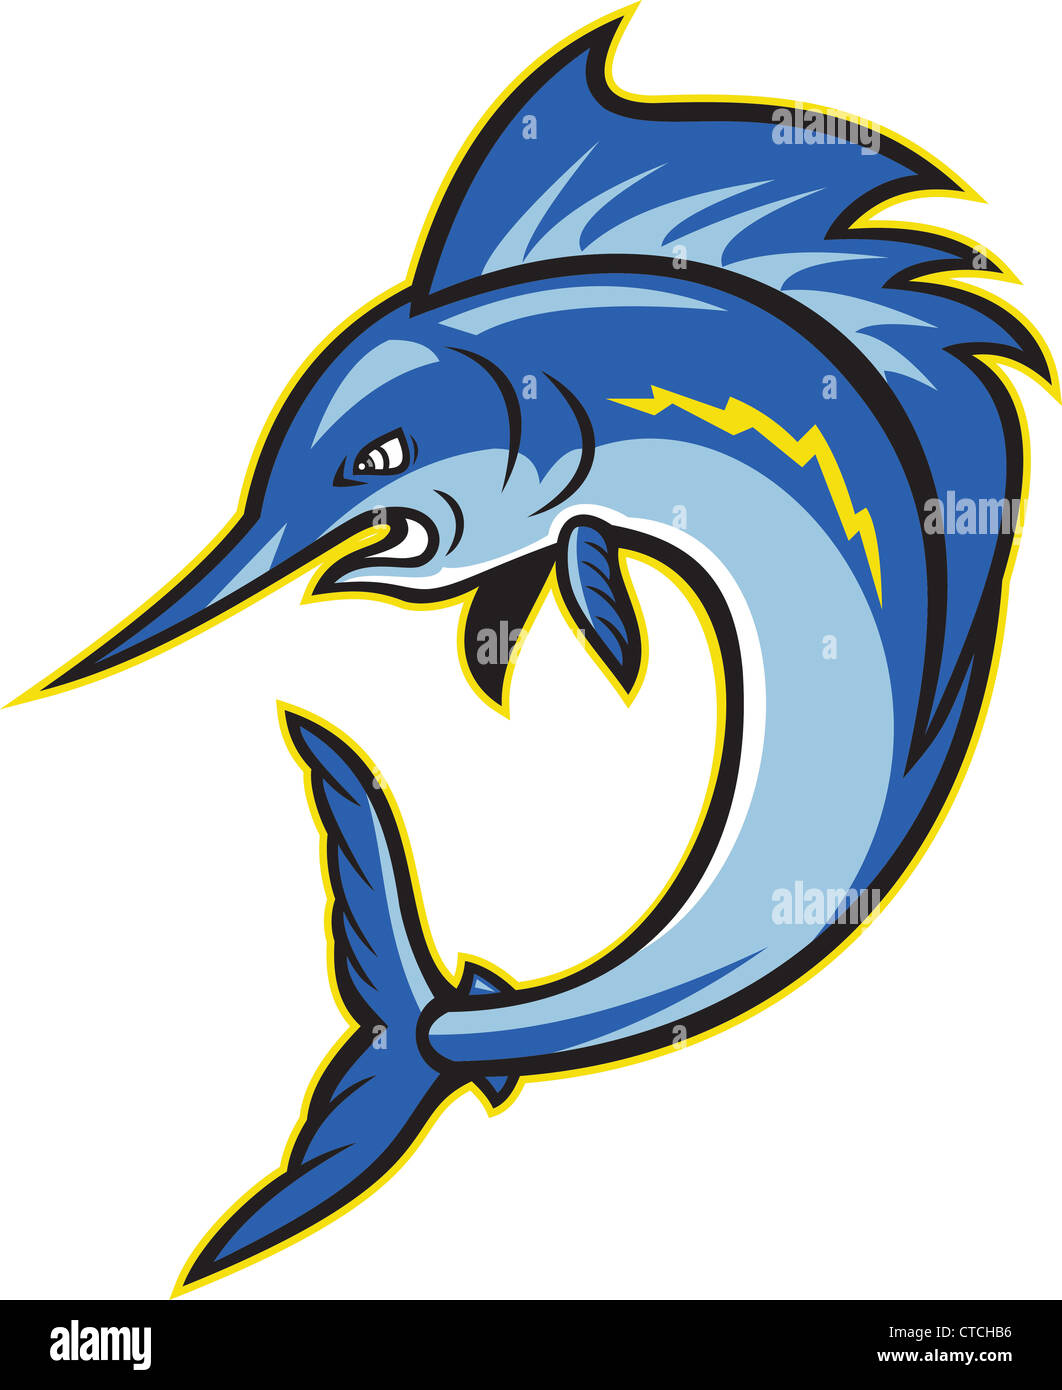 Cartoon illustration of a sailfish swordfish jumping viewed from side on isolated white background. Stock Photo